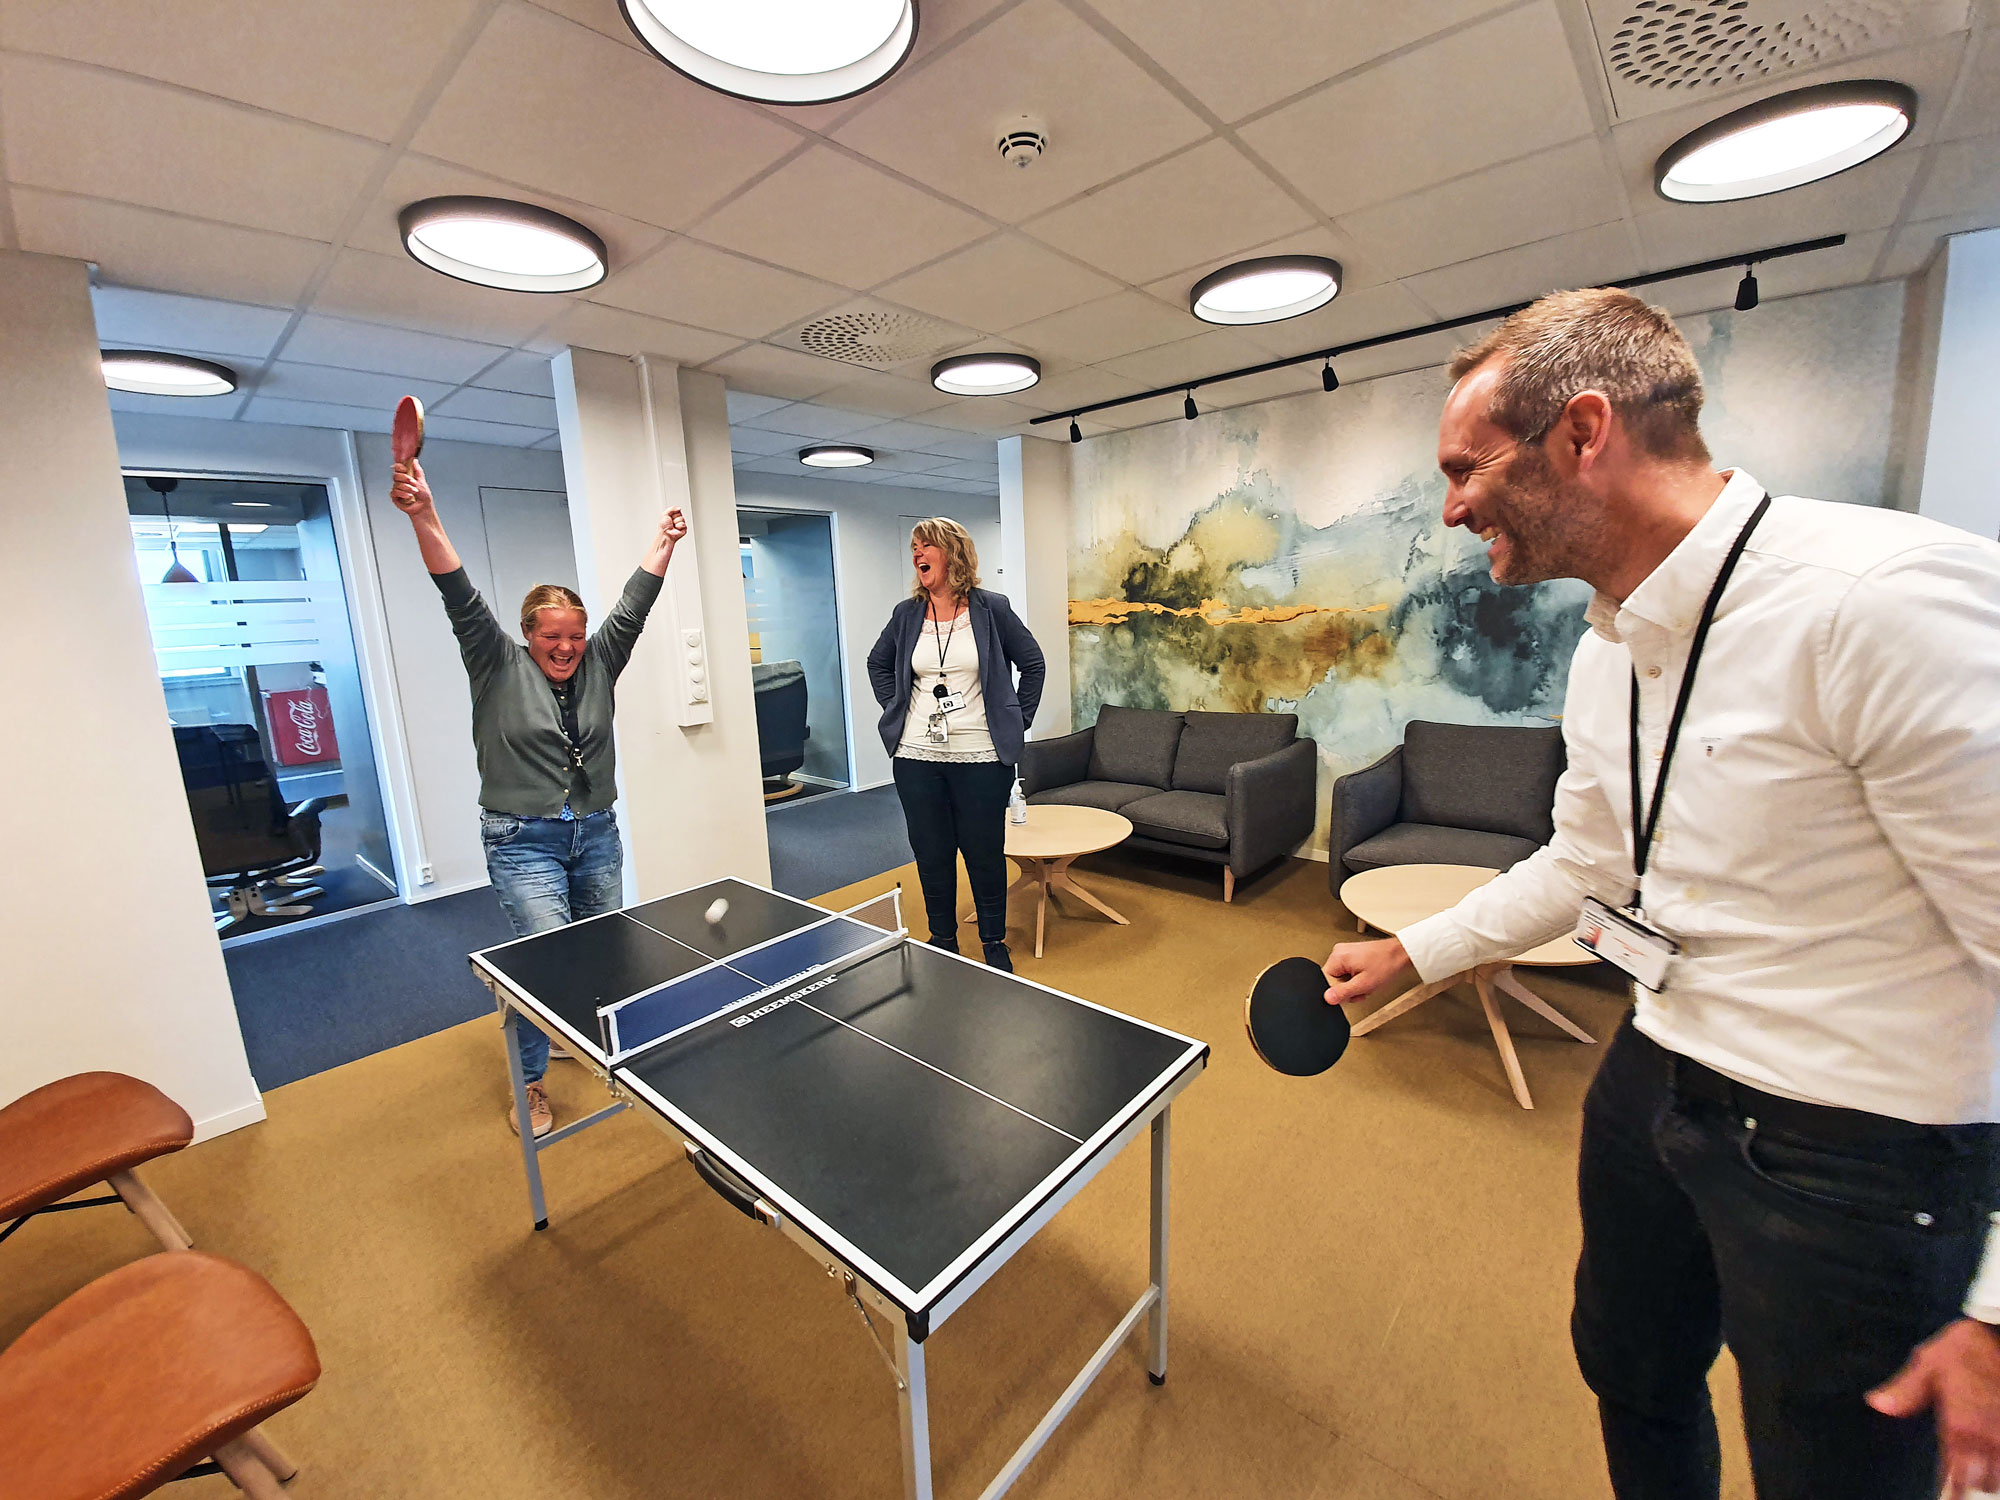 two persons playing table tennis, joy, arms in the air, offices